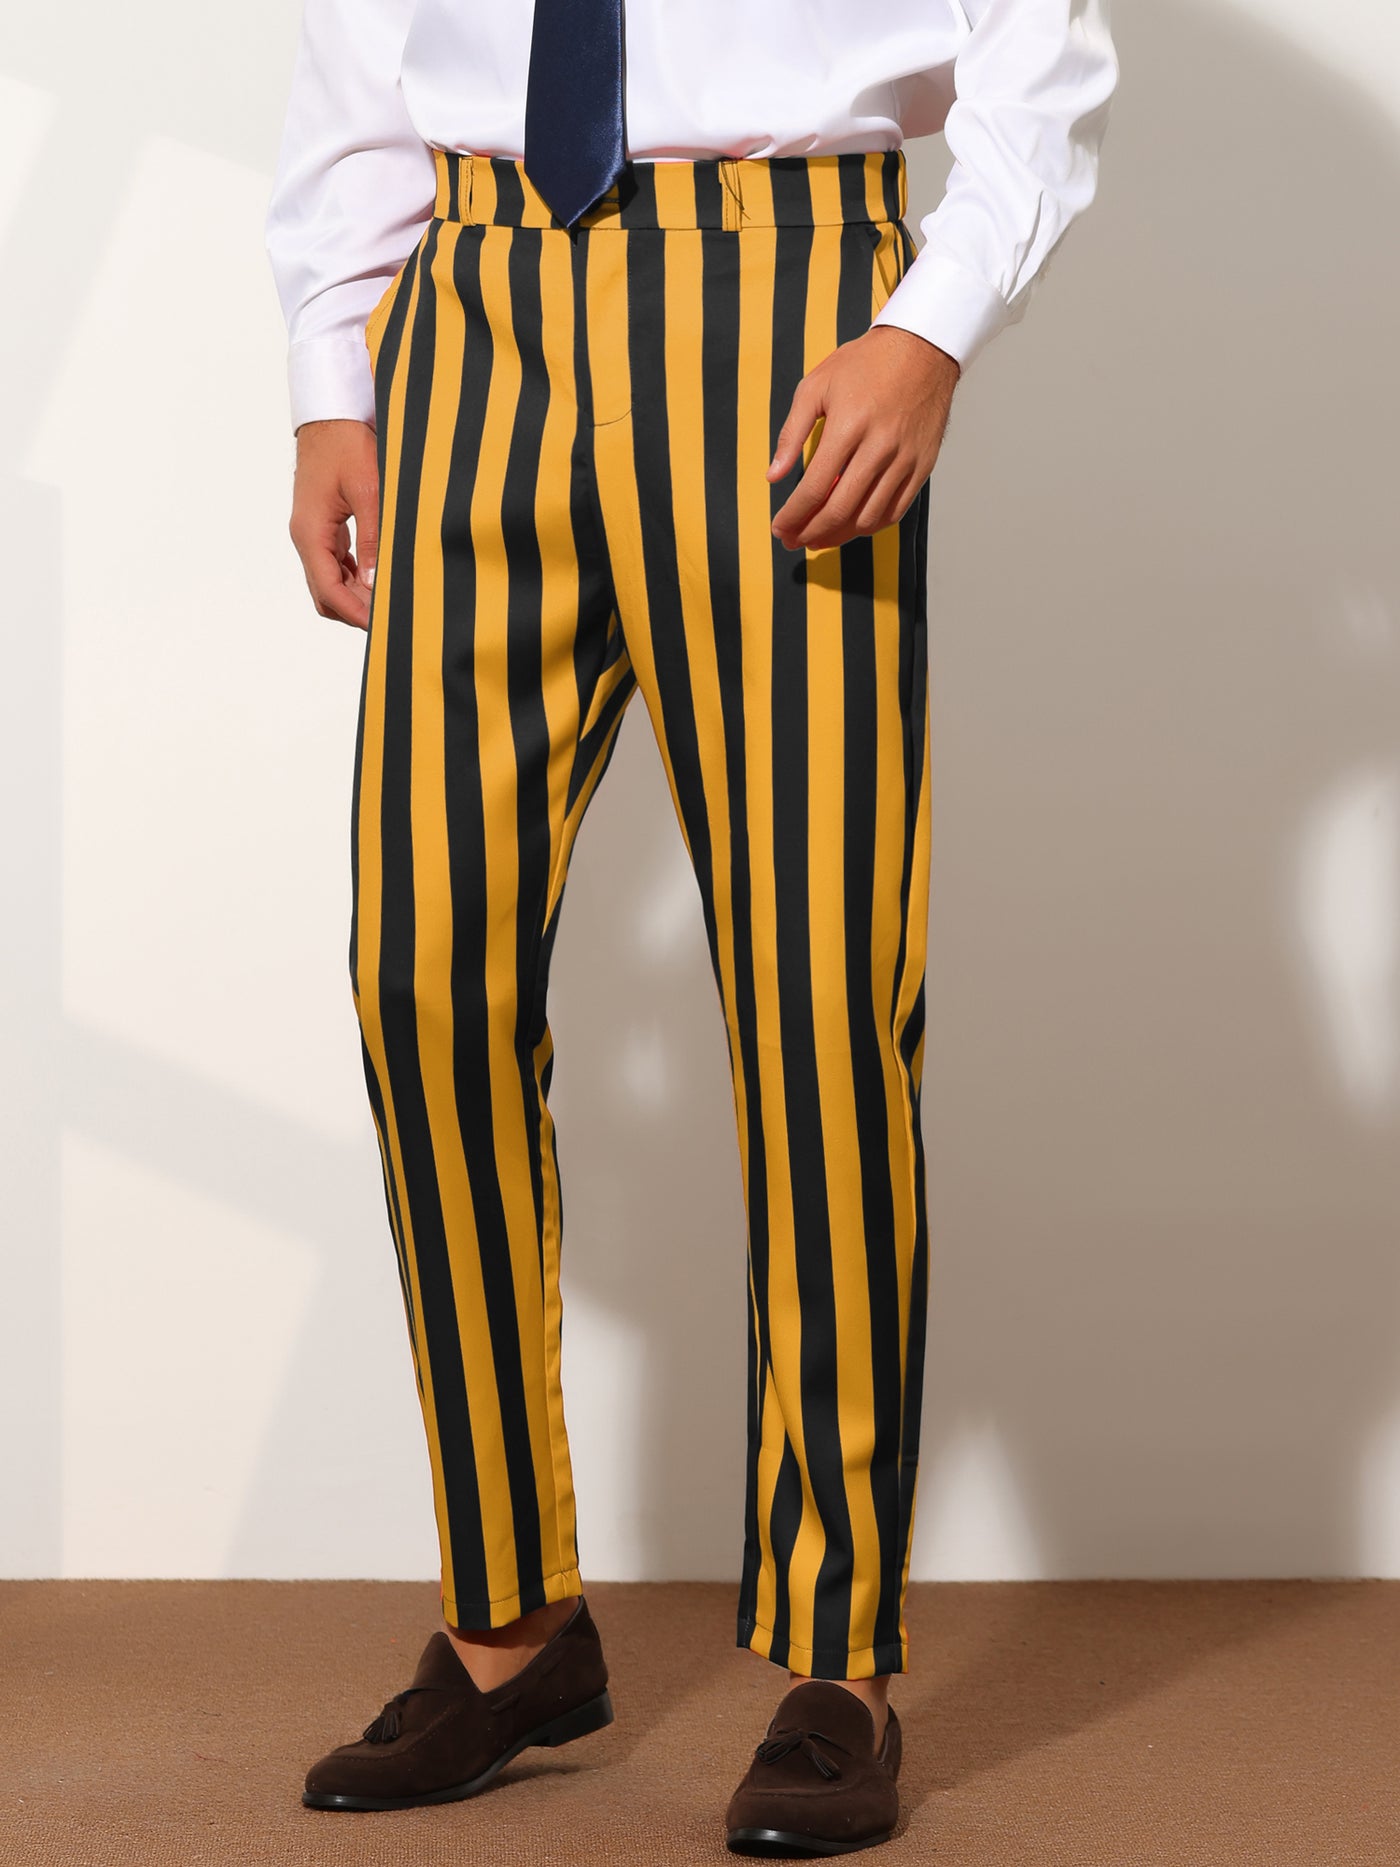 Bublédon Striped Dress Pants for Men's Big & Tall Flat Front Business Trousers